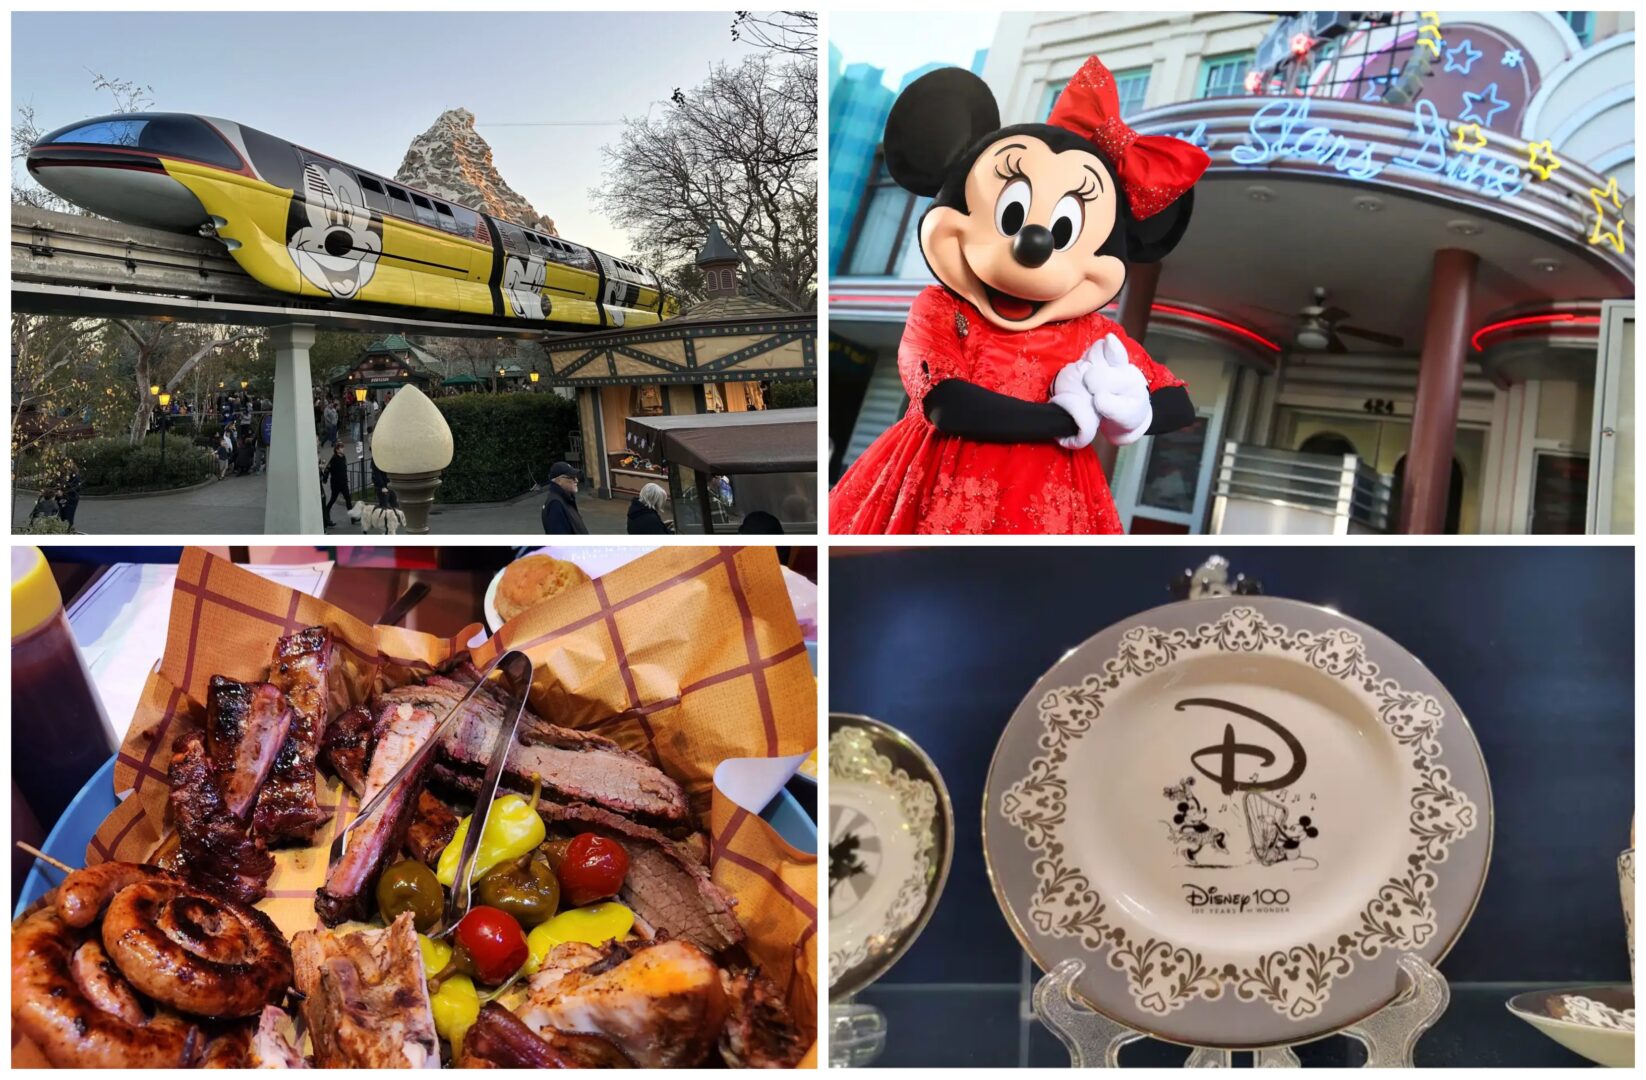 Disney News Highlights: Disney Dining Plan All You Need to Know, Disneyland Monorail and Ride Closures, Lower Park Attendance for Holiday Weekend, National Churro Day is Coming